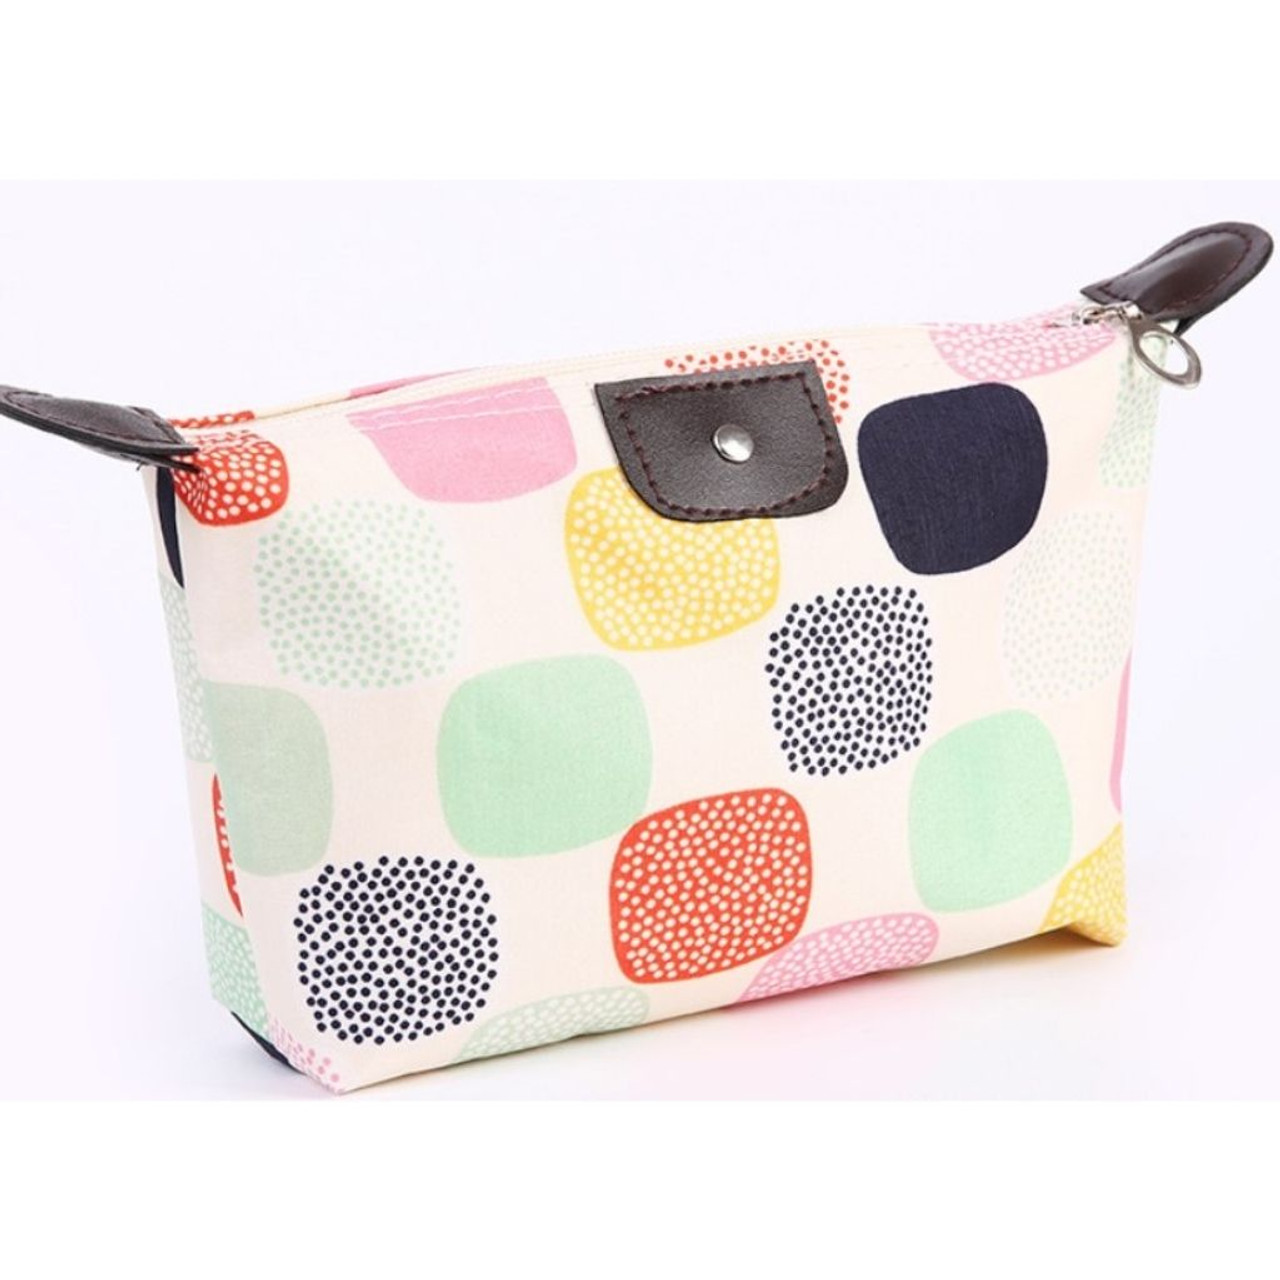 Compact Everything Bag - Buy 2 Get 1 Free product image